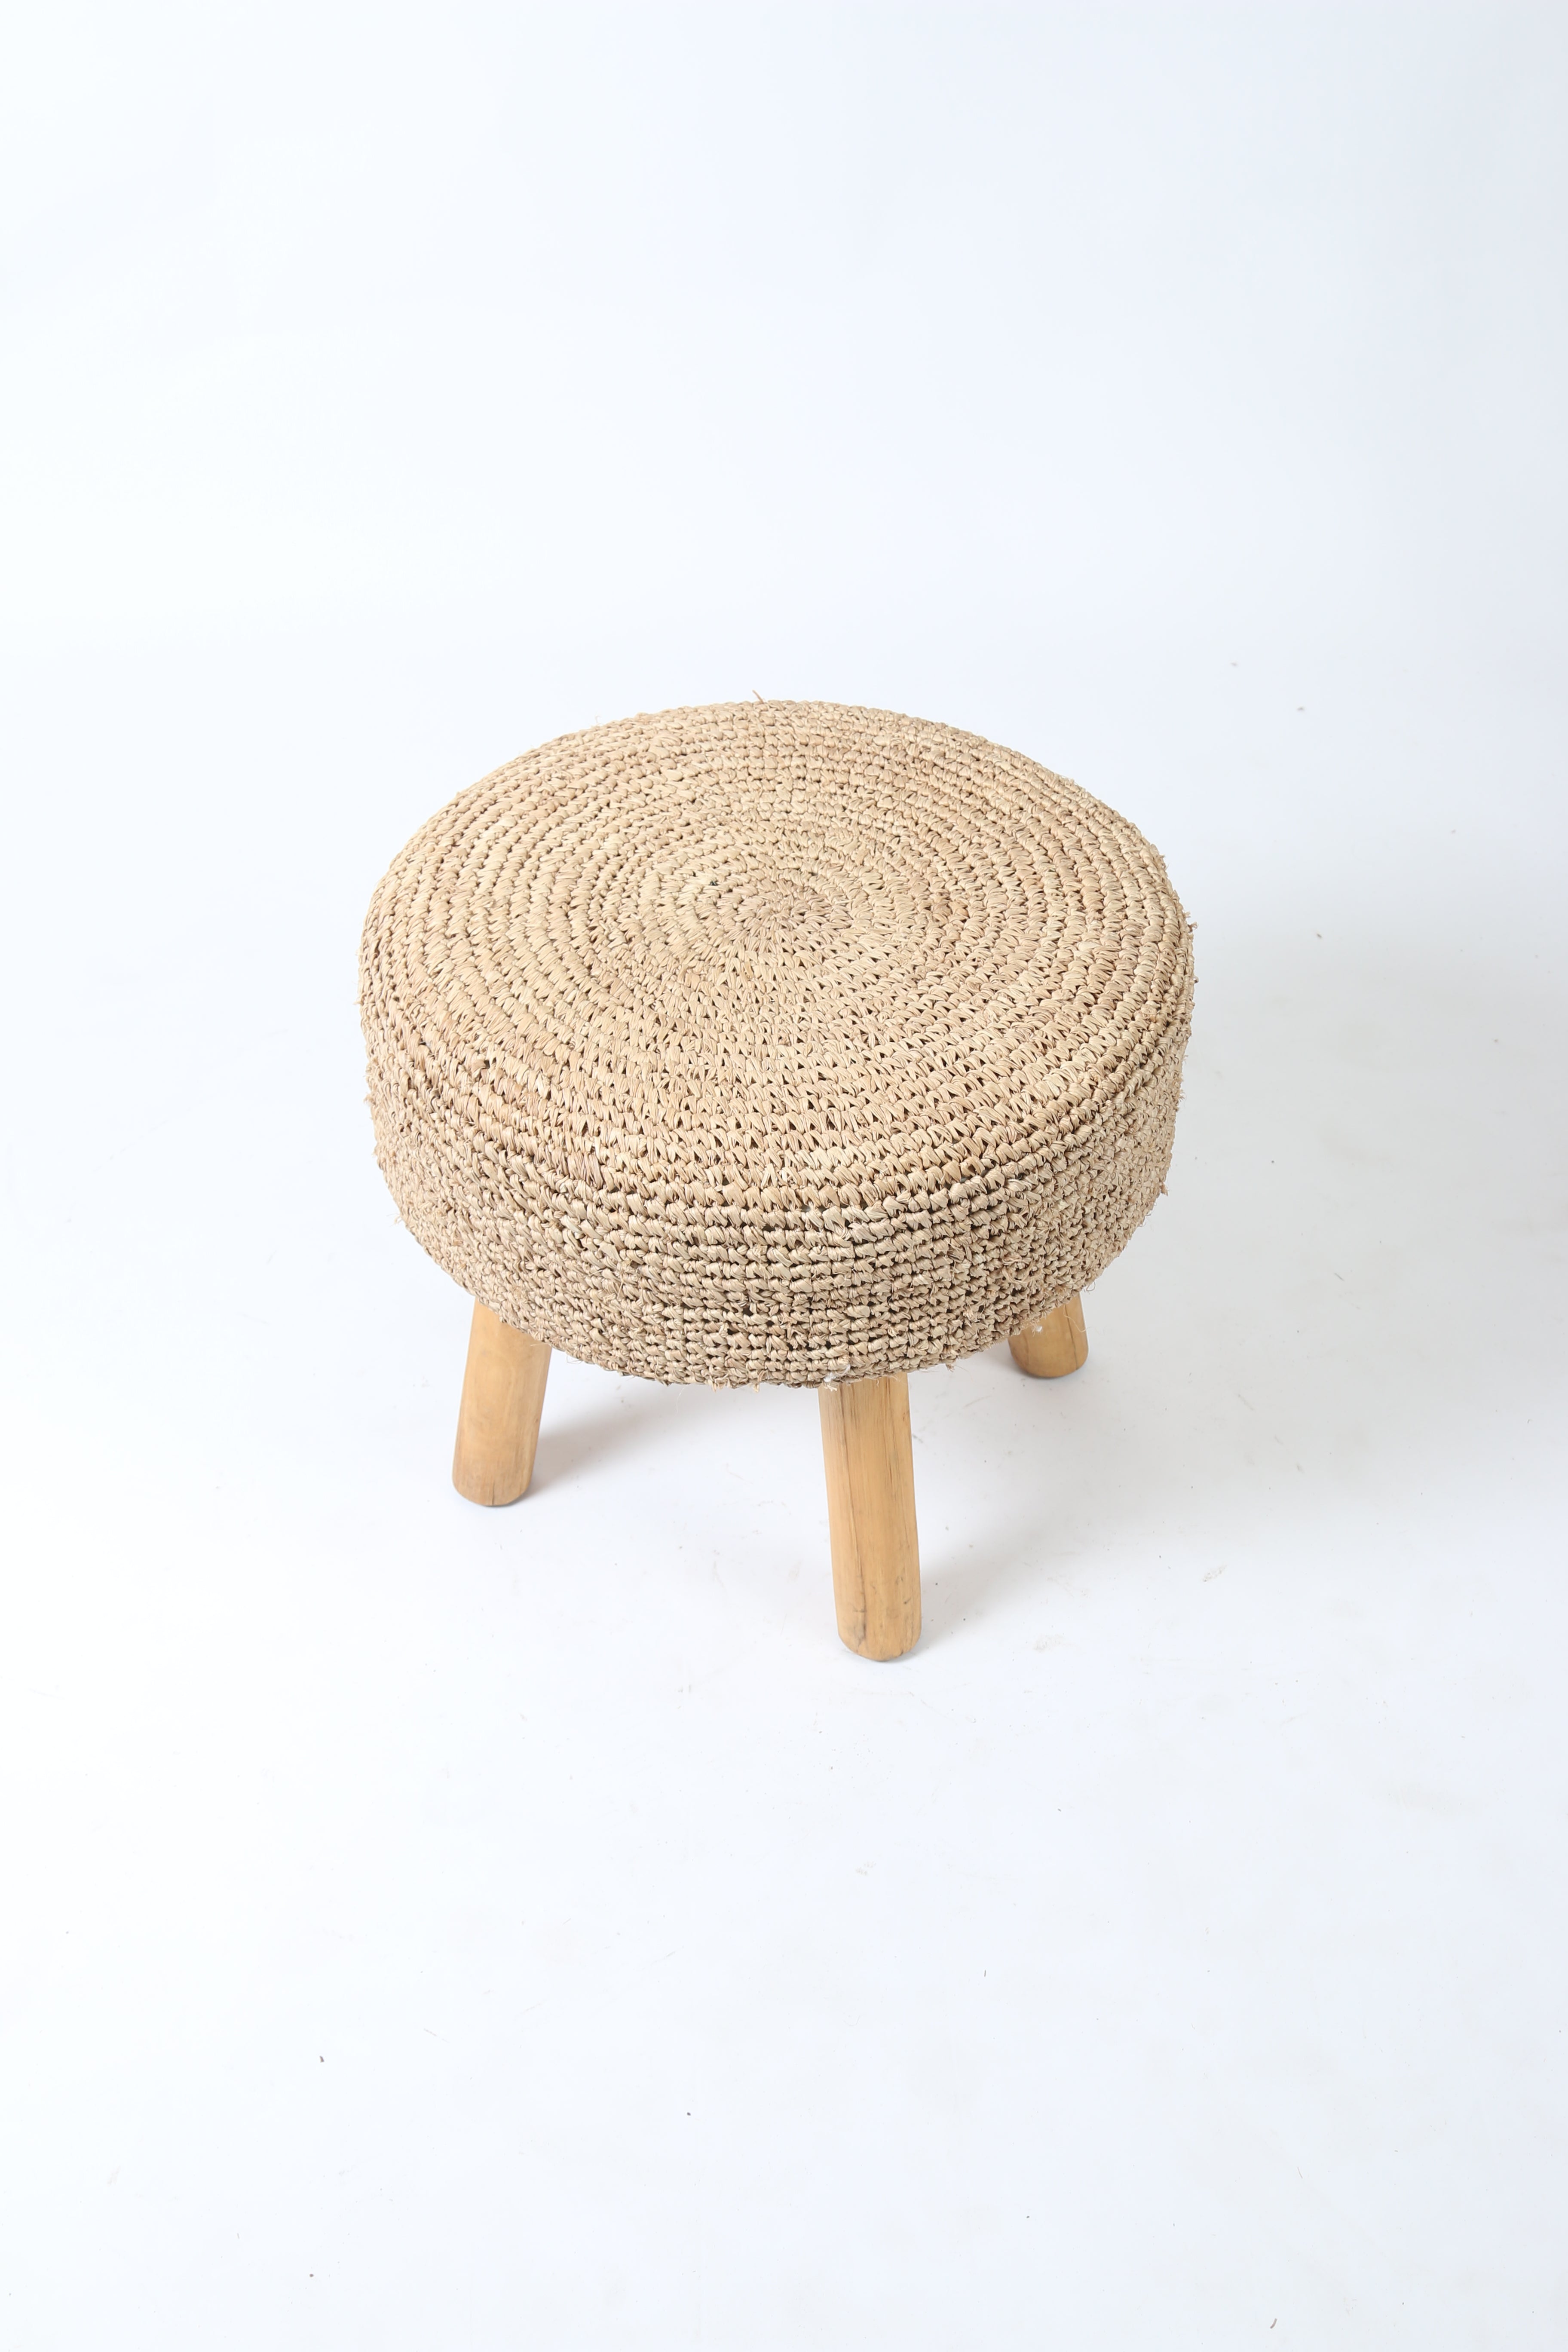 Padded Sea Grass Stool with Four Wooden Teak Legs